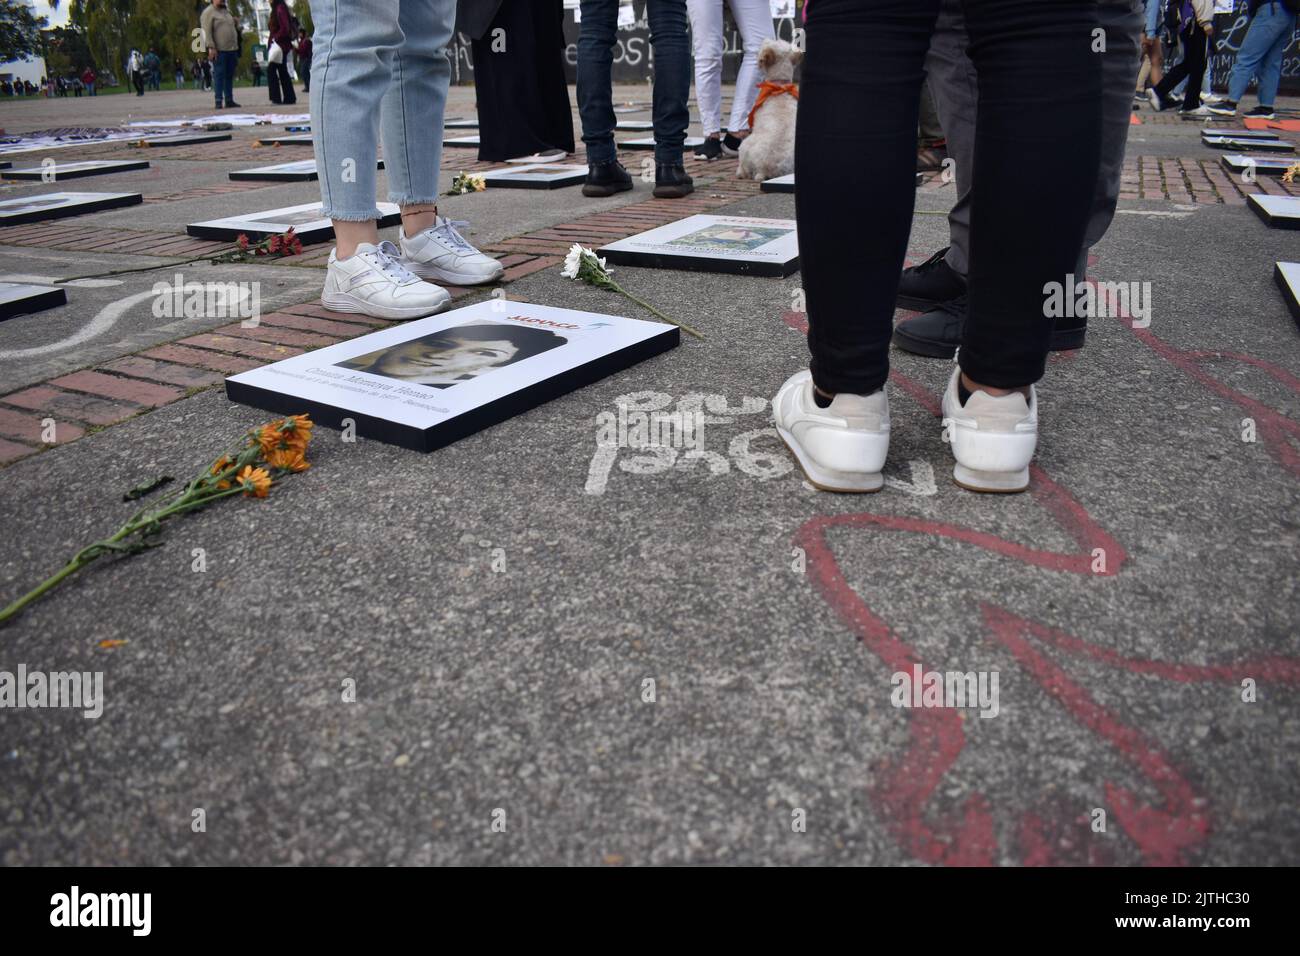 Bogota, Colombia, August 30, 2022. Photos of victims of enforced disapearances are seen with the word phrase 'Never Forgotten' during the framework of the International Day of the Victims of Enforced Disappearances in Bogota, Colombia, August 30, 2022. According to Colombia's Victims unit more than 130.000 people had been indirect victims of Enforced Disappearances in Colombia and at least 50.000 had been direct victims of this crime. Photo by: Cristian Bayona/Long Visual Press Stock Photo